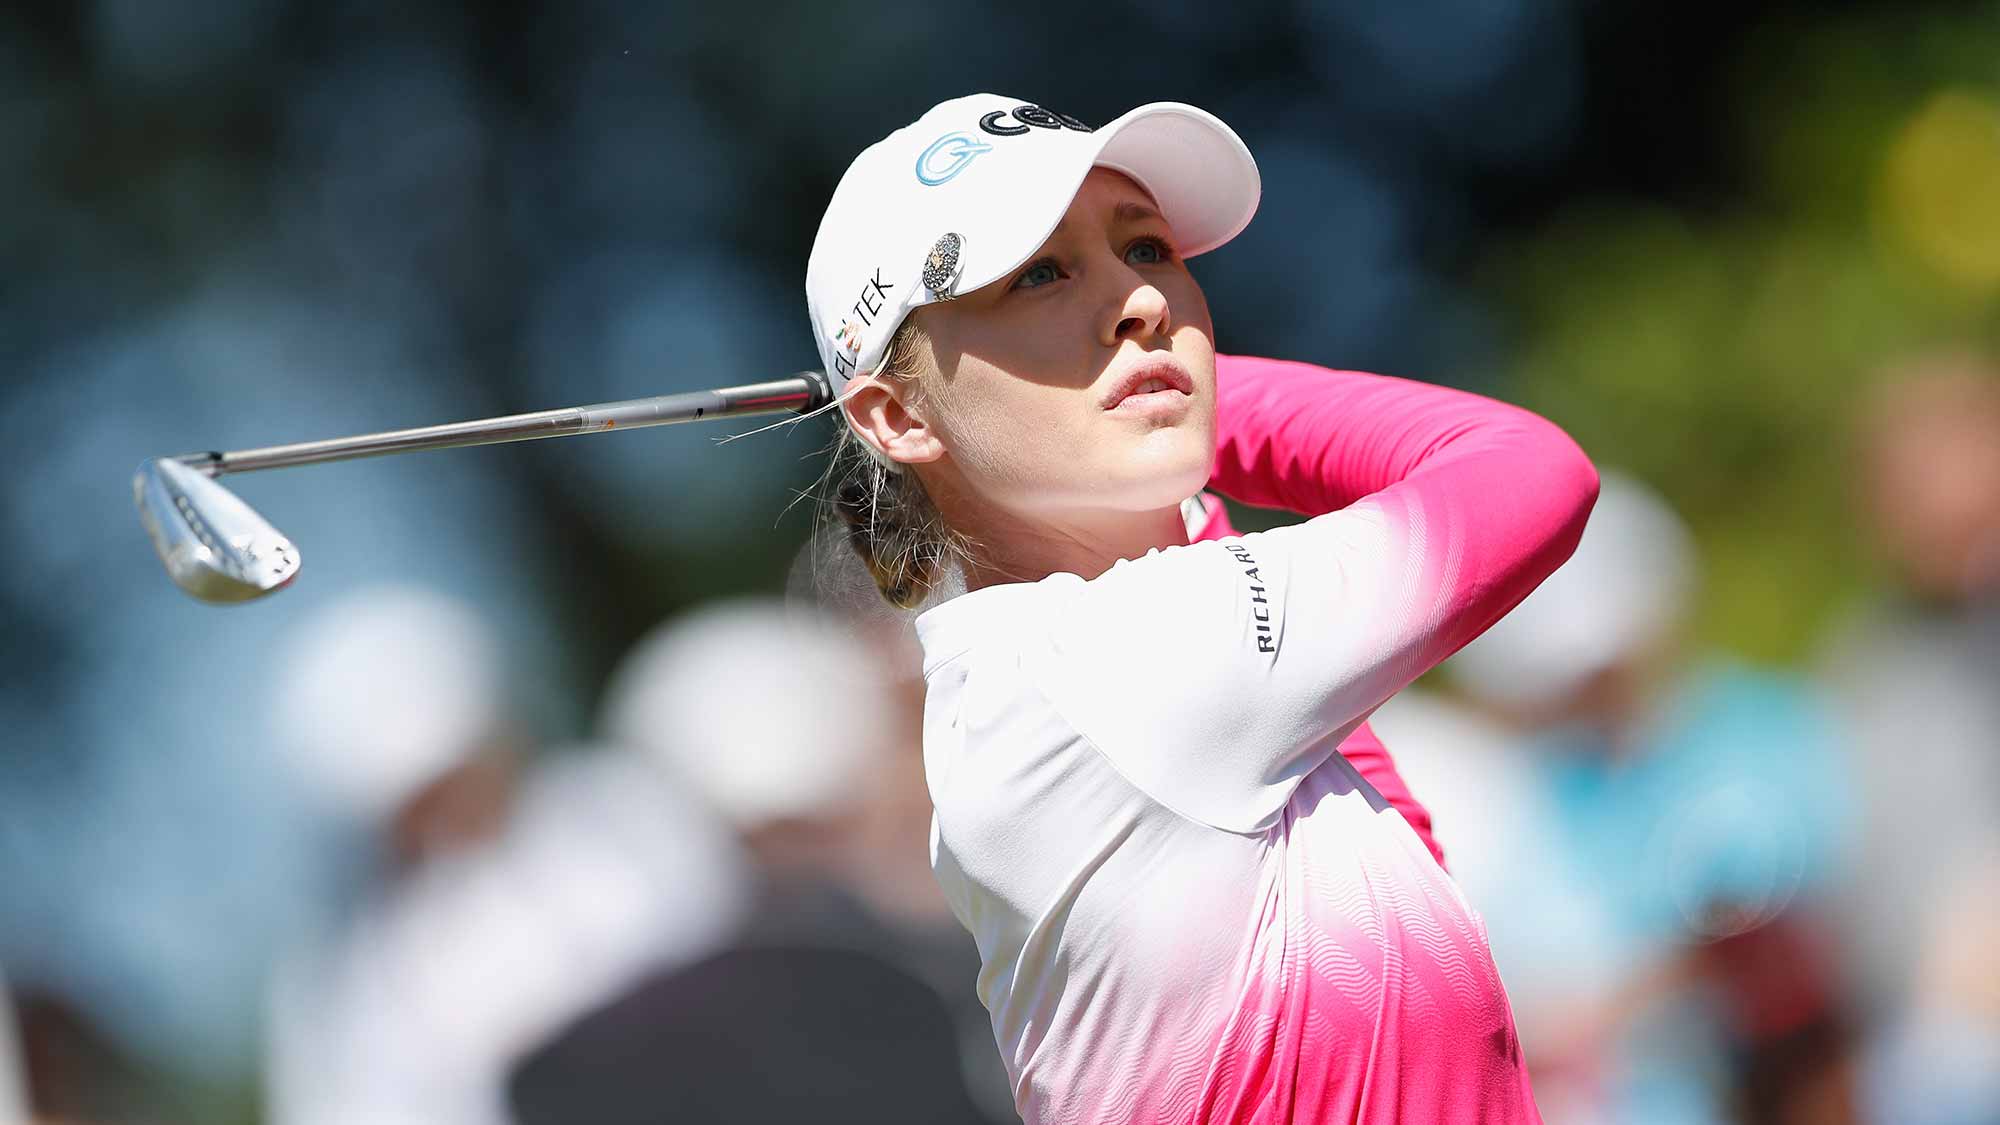 Nelly Korda of United States plays a shot during the final round of the Swinging Skirts LPGA Taiwan Championship at Ta Shee Golf & Country Club on October 28, 2018 in Taoyuan, Chinese Taipei